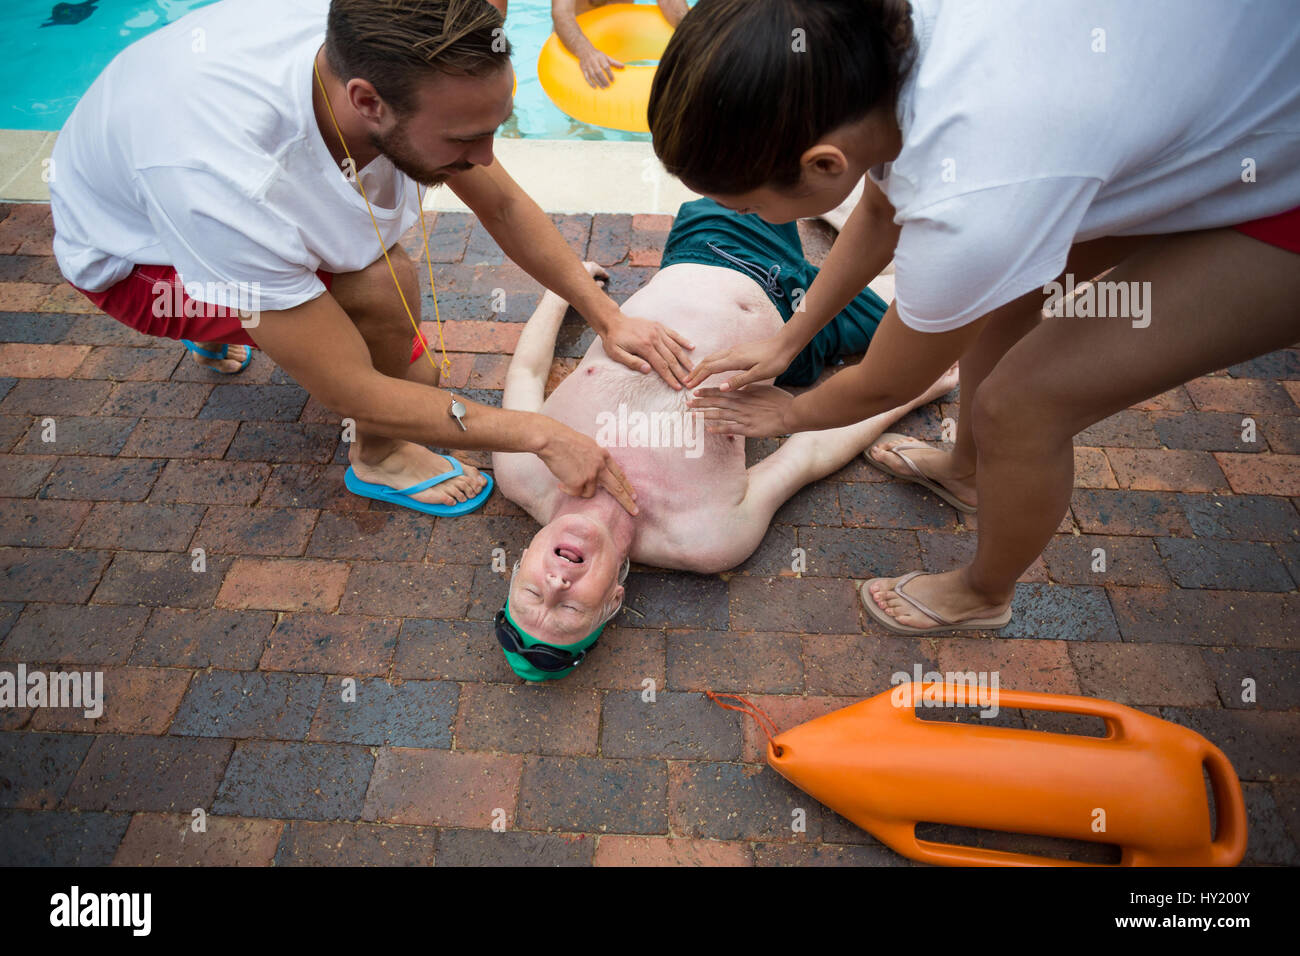 High angle view of rescue workers saving unconscious senior man at poolside Stock Photo